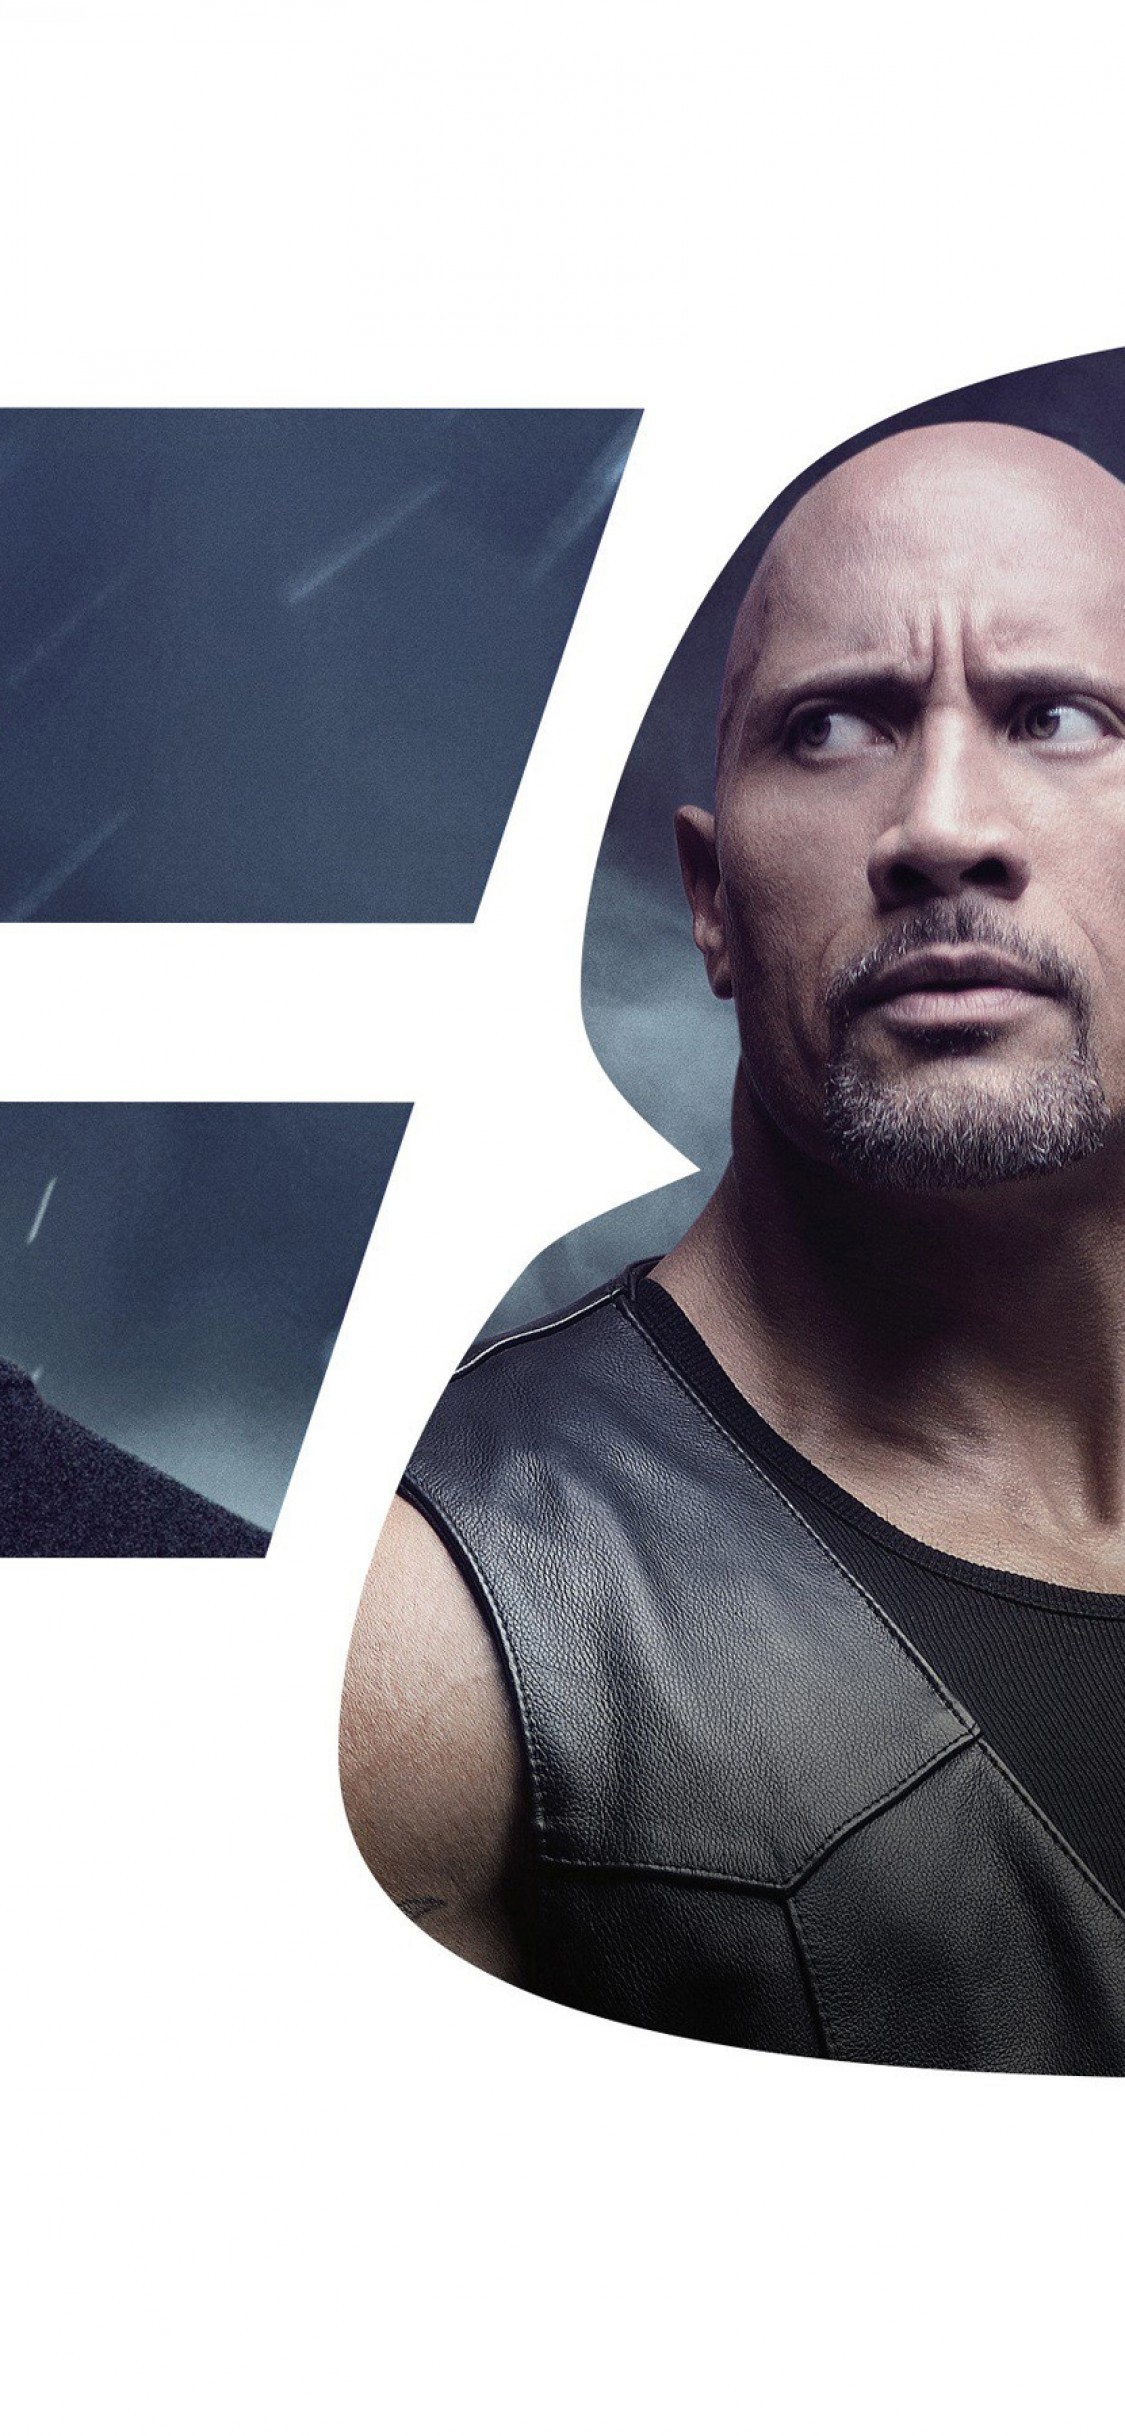 Fate Of The Furious, Vin Diesel, Dwayne Johnson - Fate Of The Furious Movie , HD Wallpaper & Backgrounds